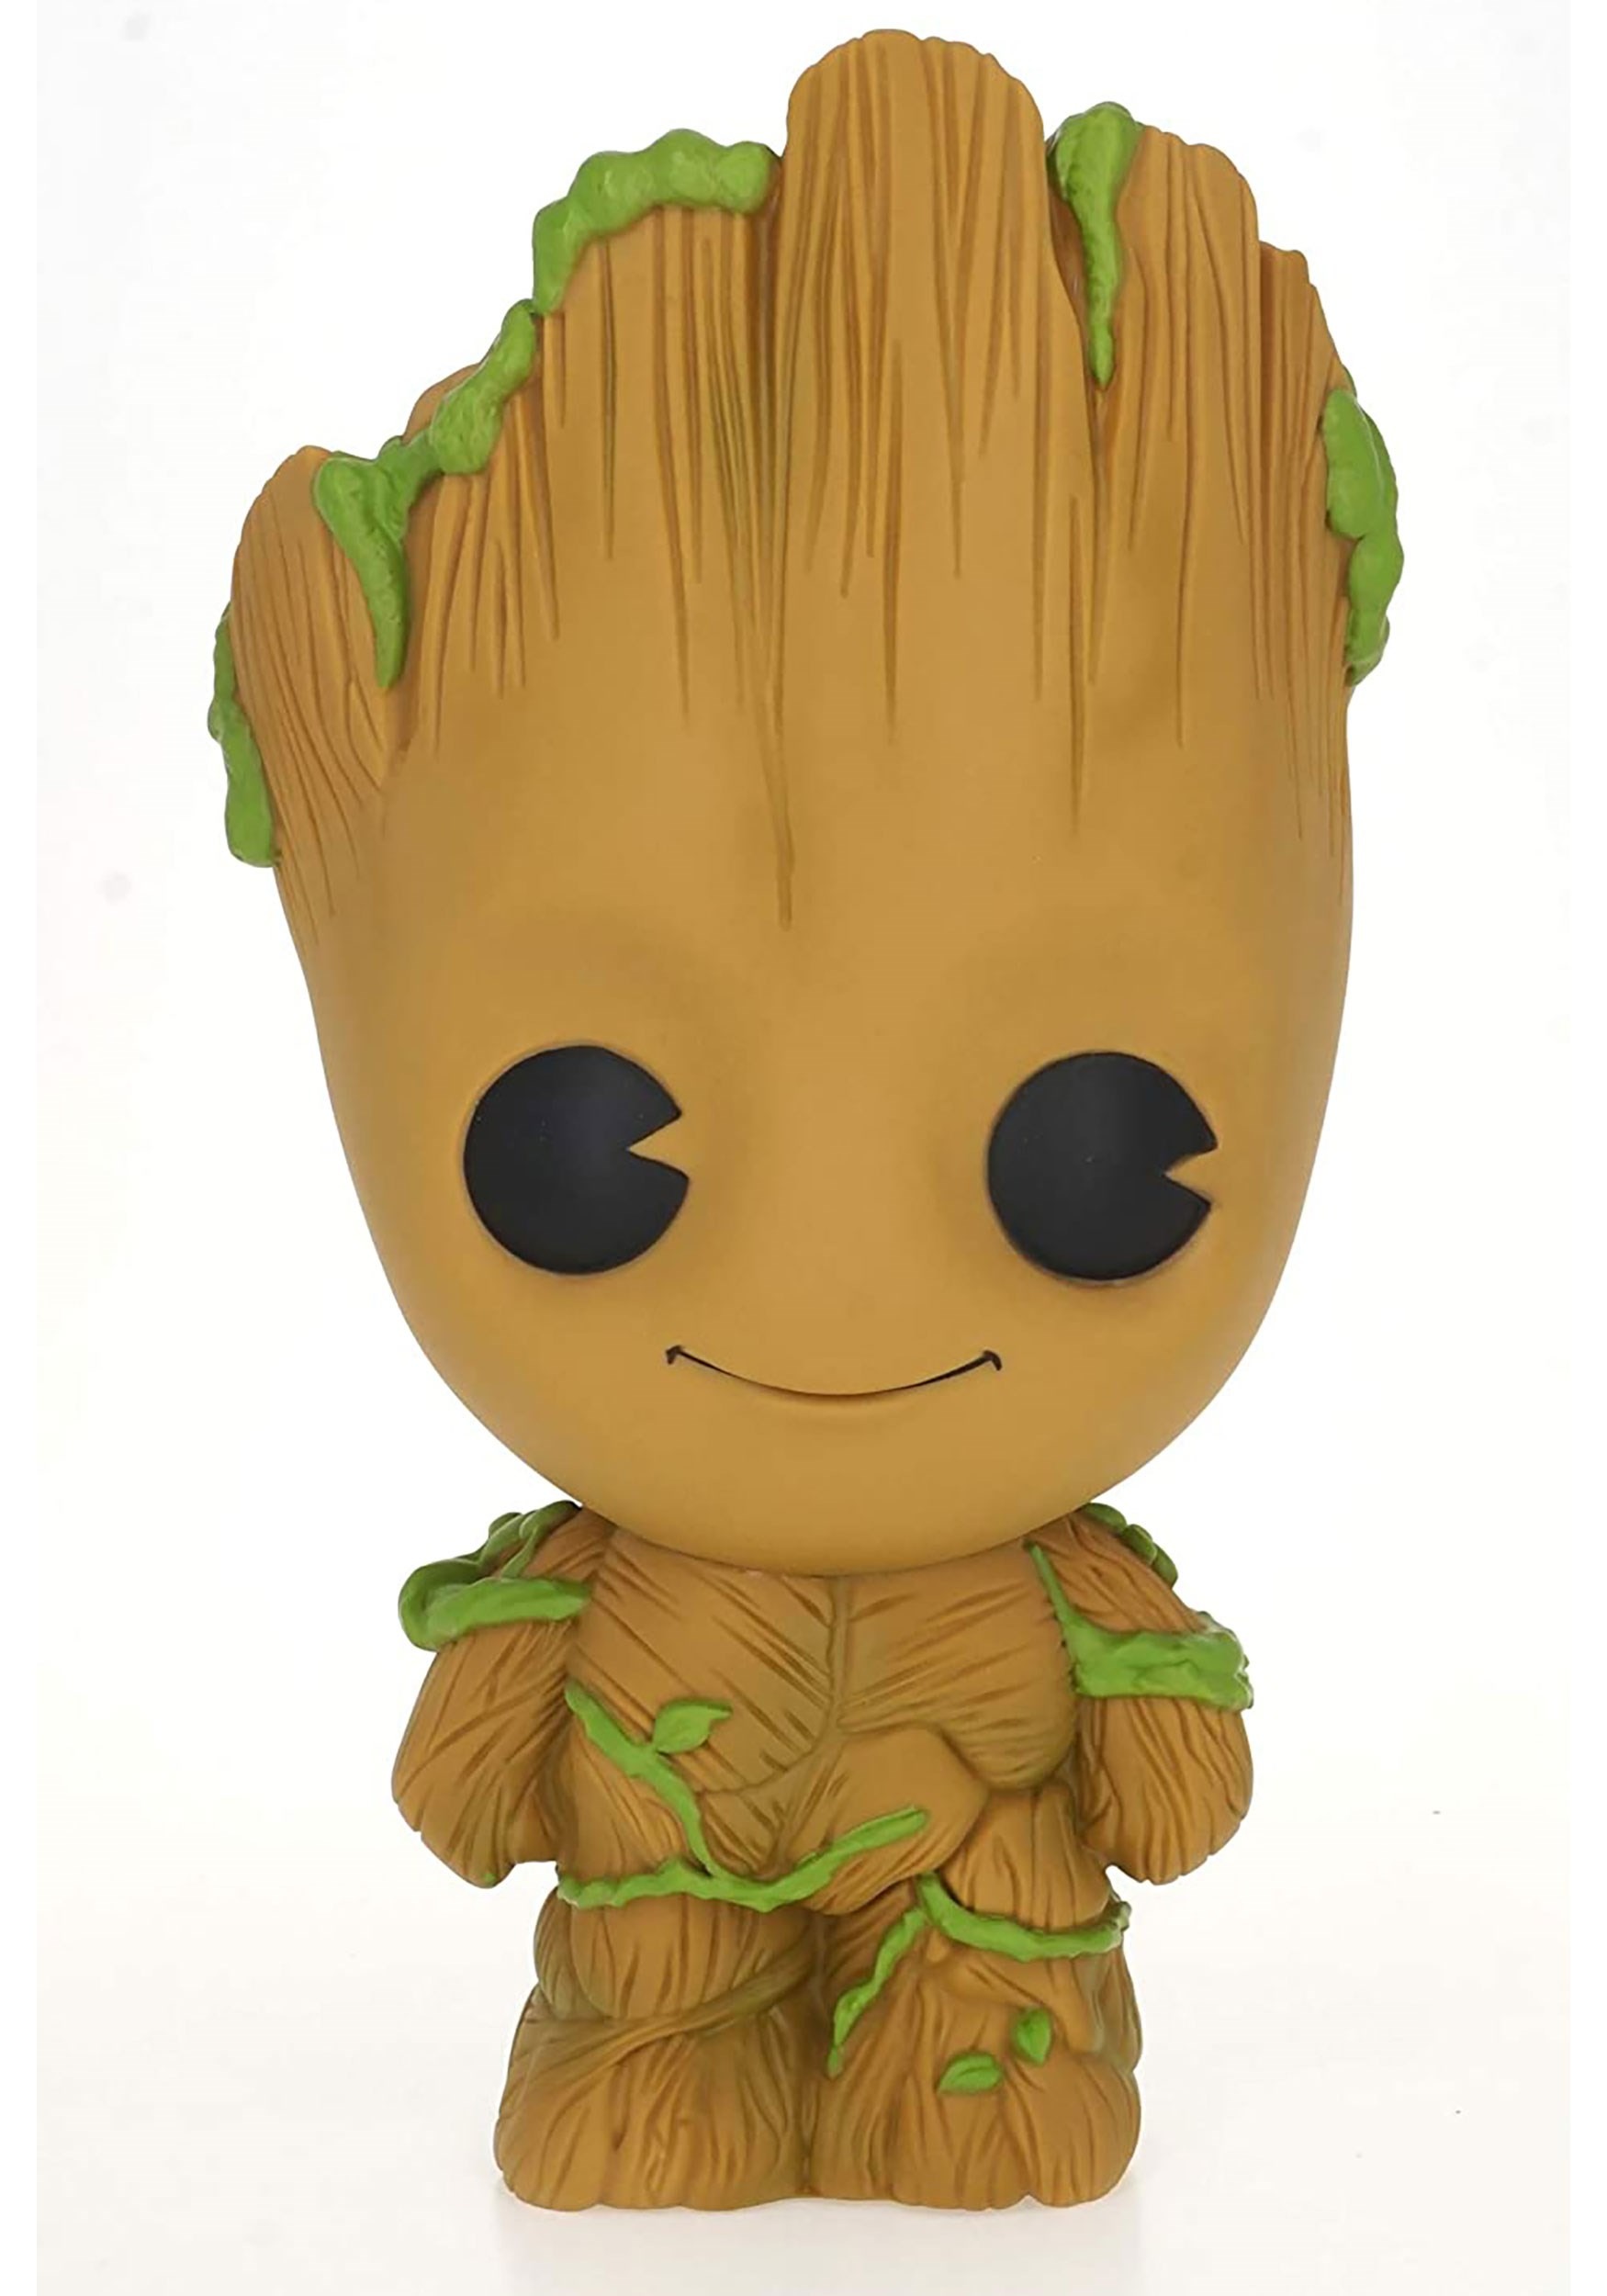 Guardians of the Galaxy Groot Coin Bank